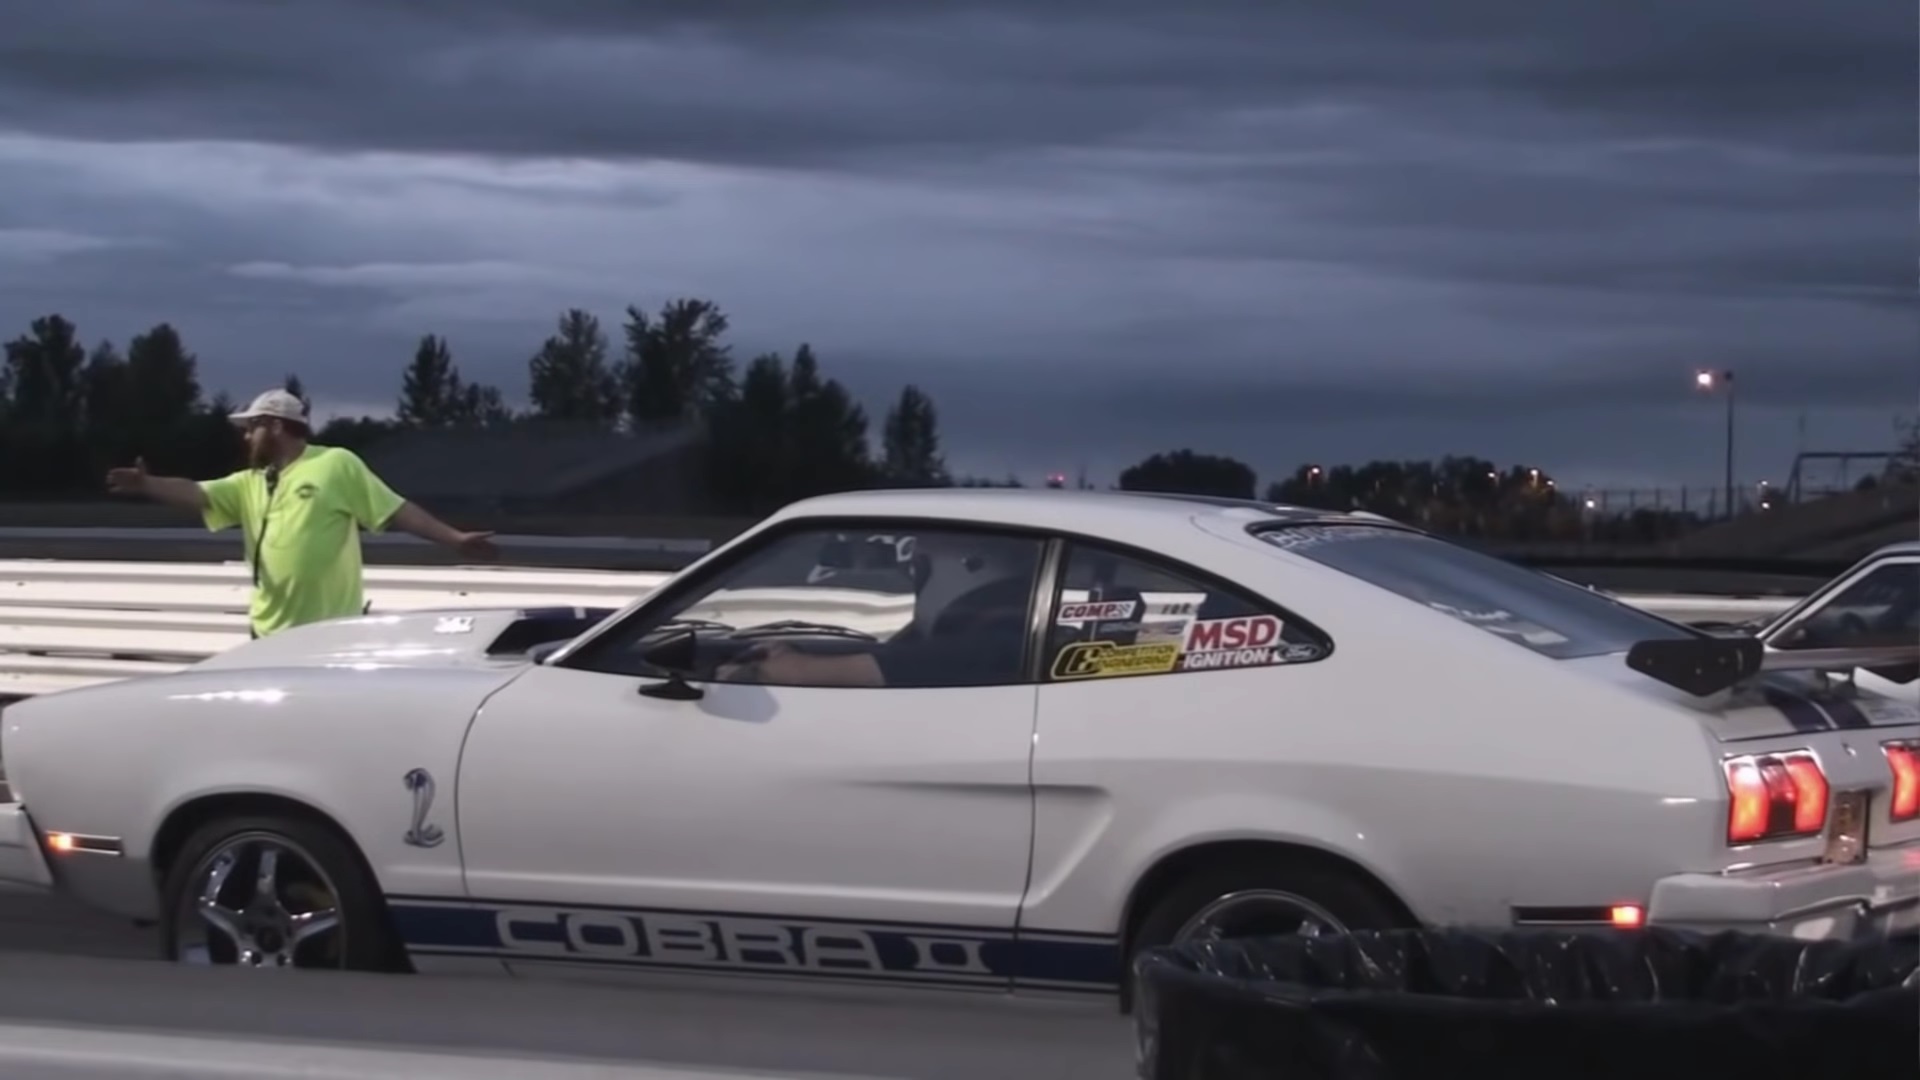 Video: 1977 Ford Mustang Cobra II At A Drag Race